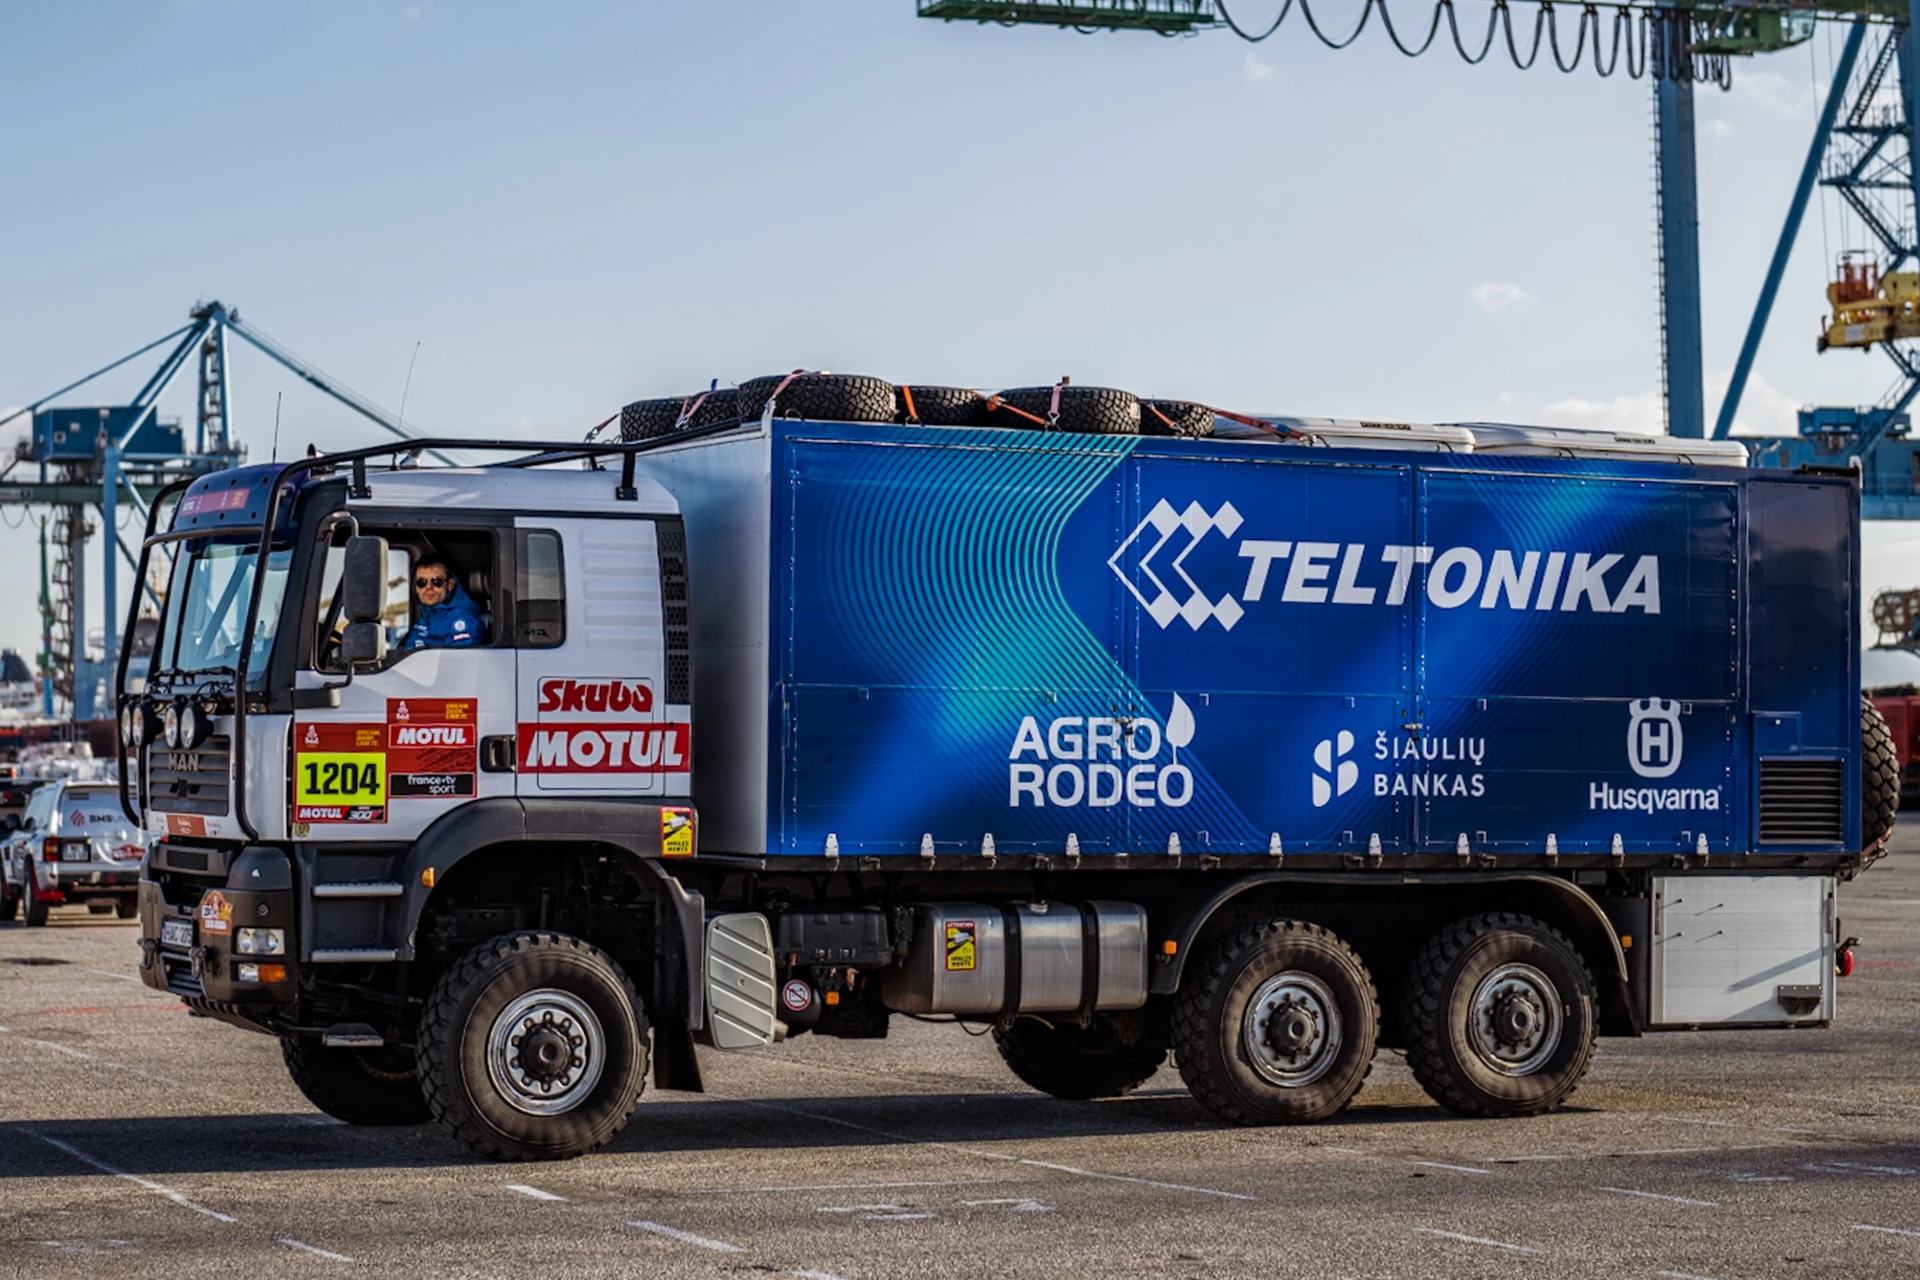 teltonika-telematics-solutions-for-challenging-driving-conditions-in-the-2022-dakar-rally-preview-1920x1280.jpg